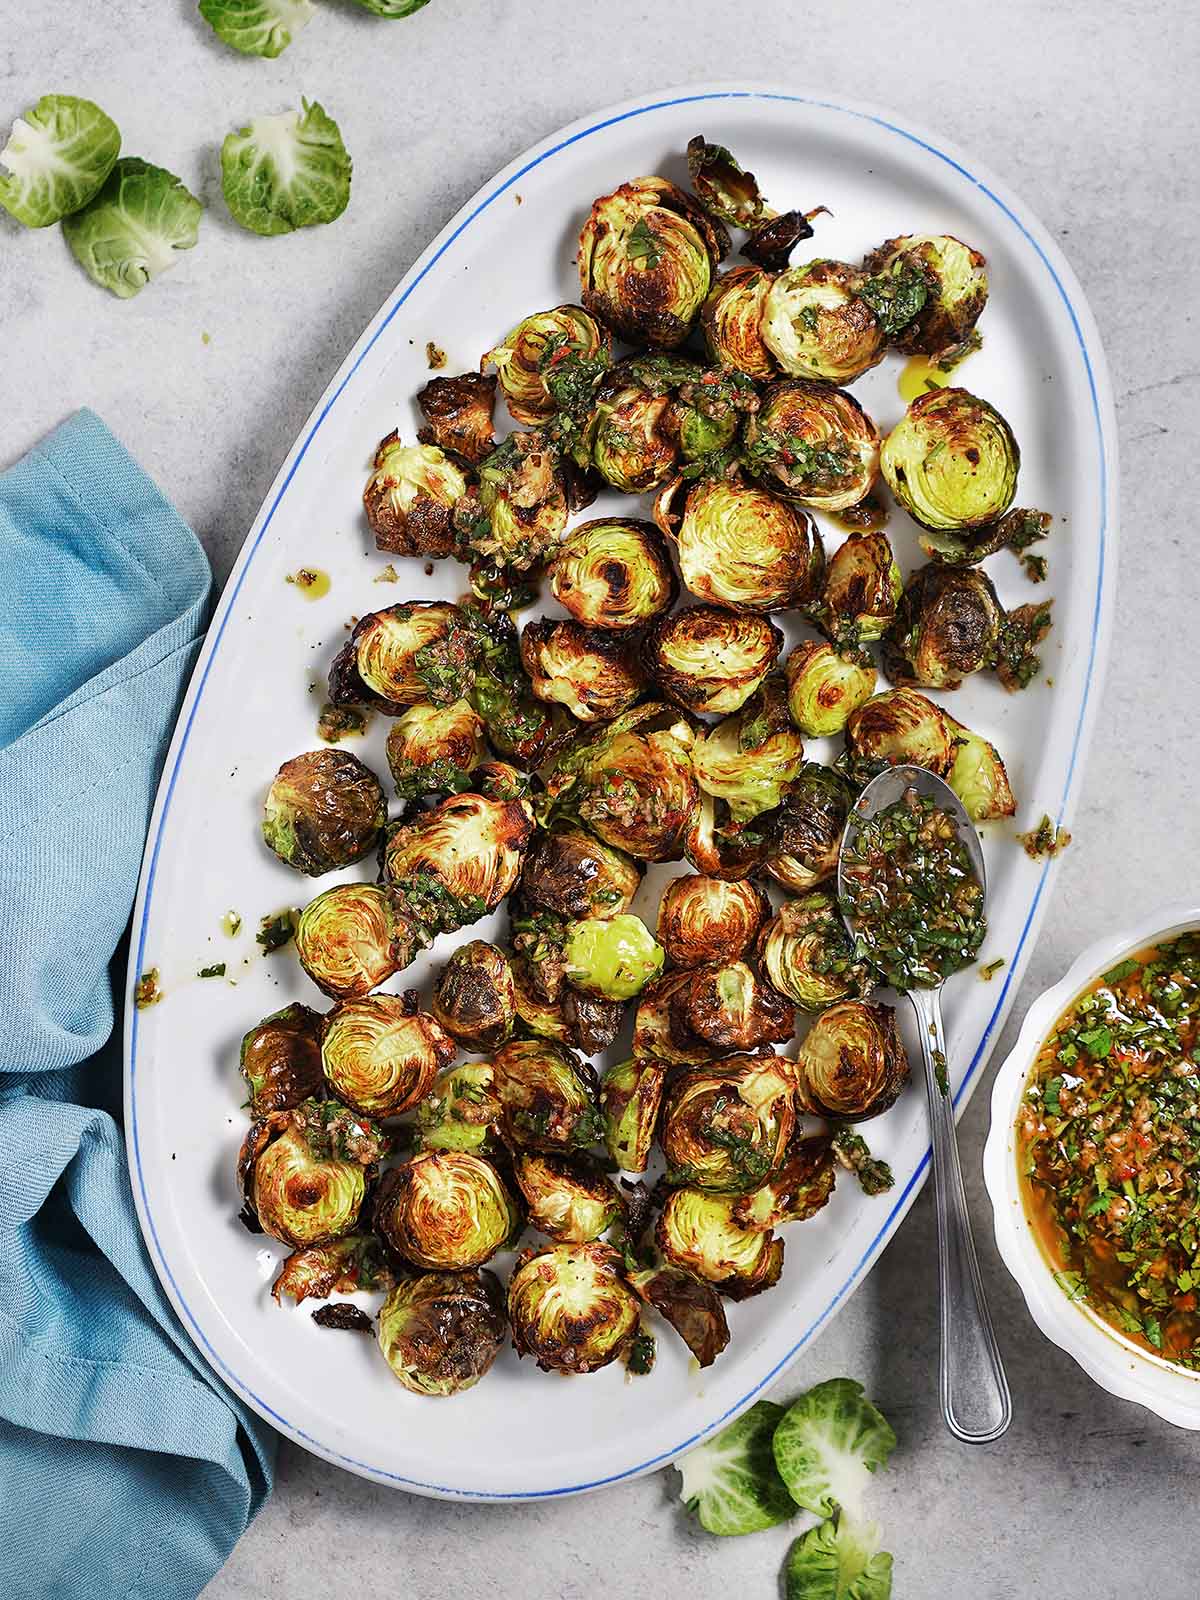 An oval plate with roasted brussel sprouts.